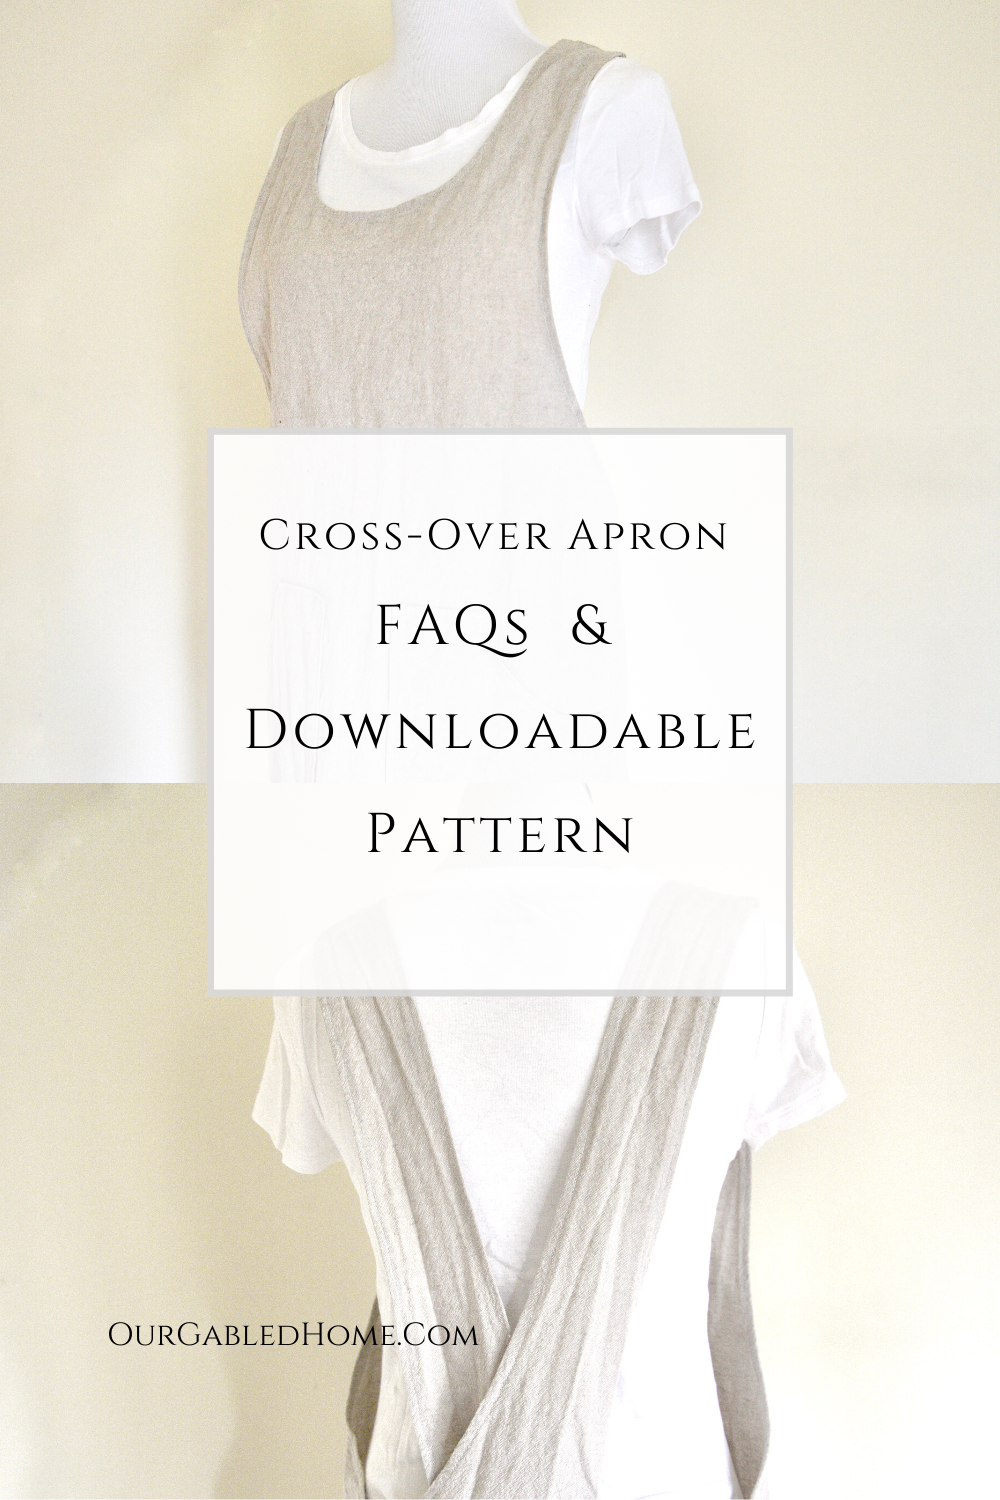 Cross-over Apron FAQs & Downloadable Pattern